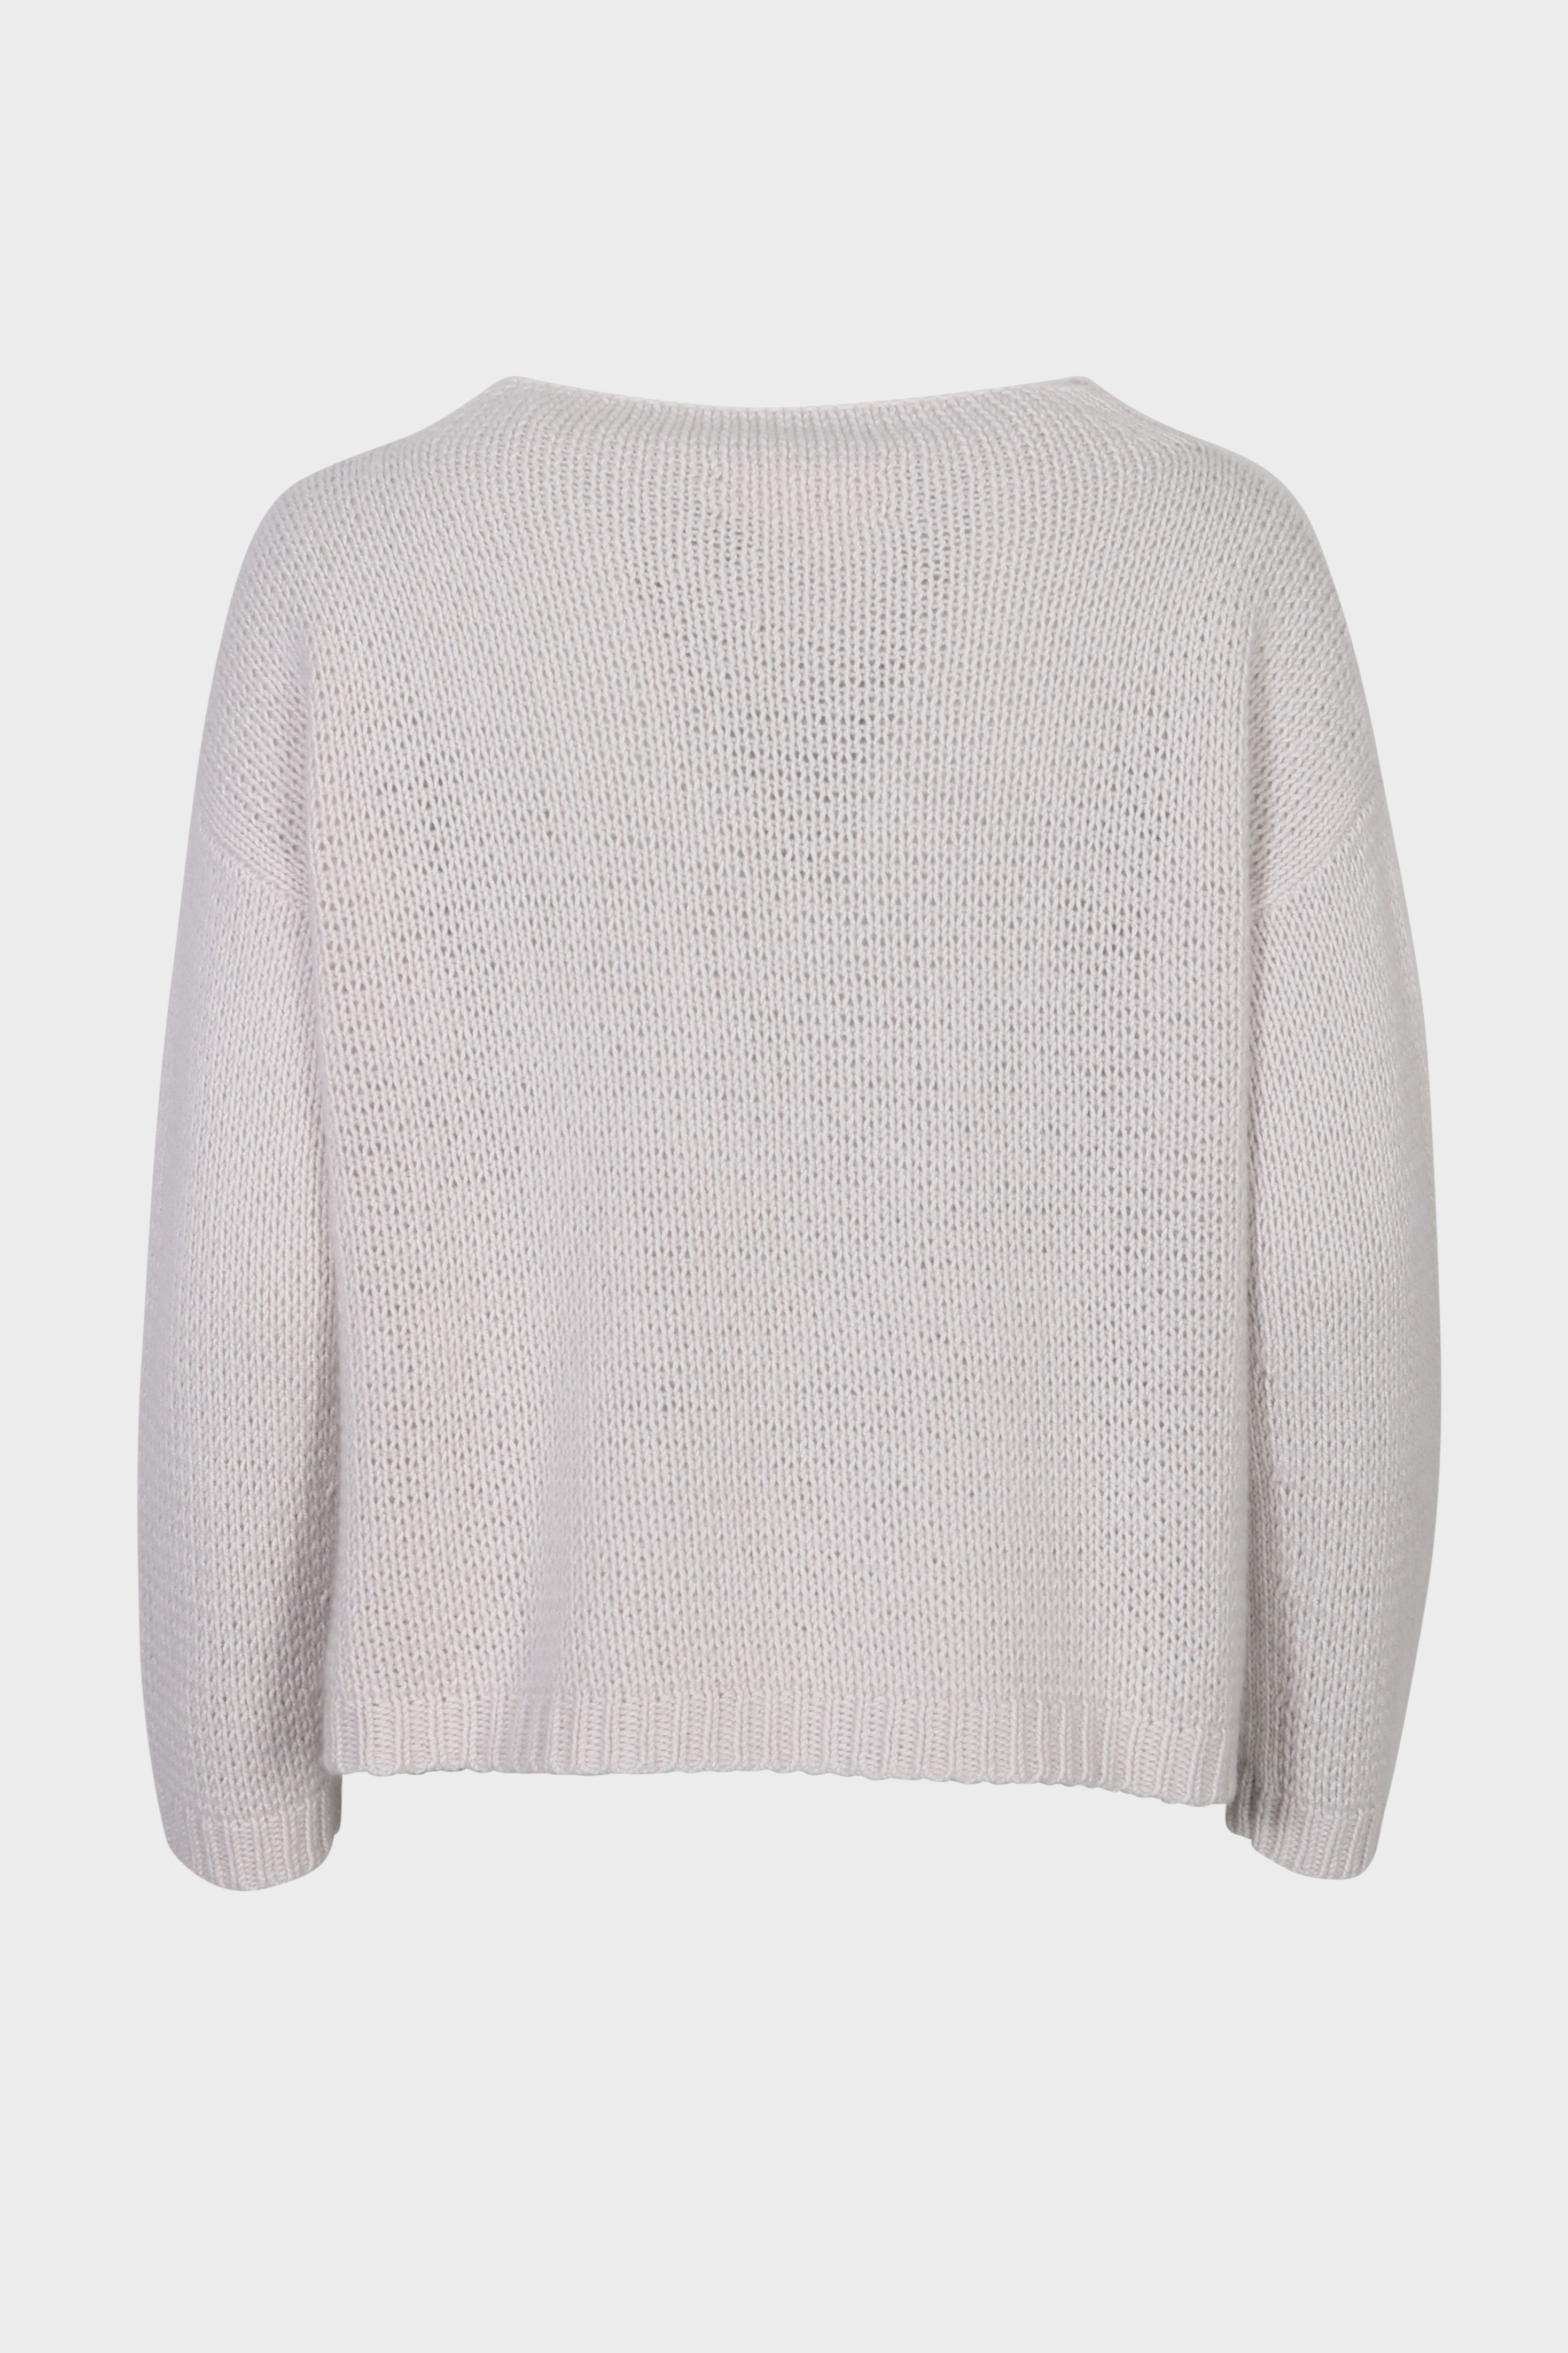 SMINFINITY Chilly Loose & Tight  Knit Pullover in Pebble M/L